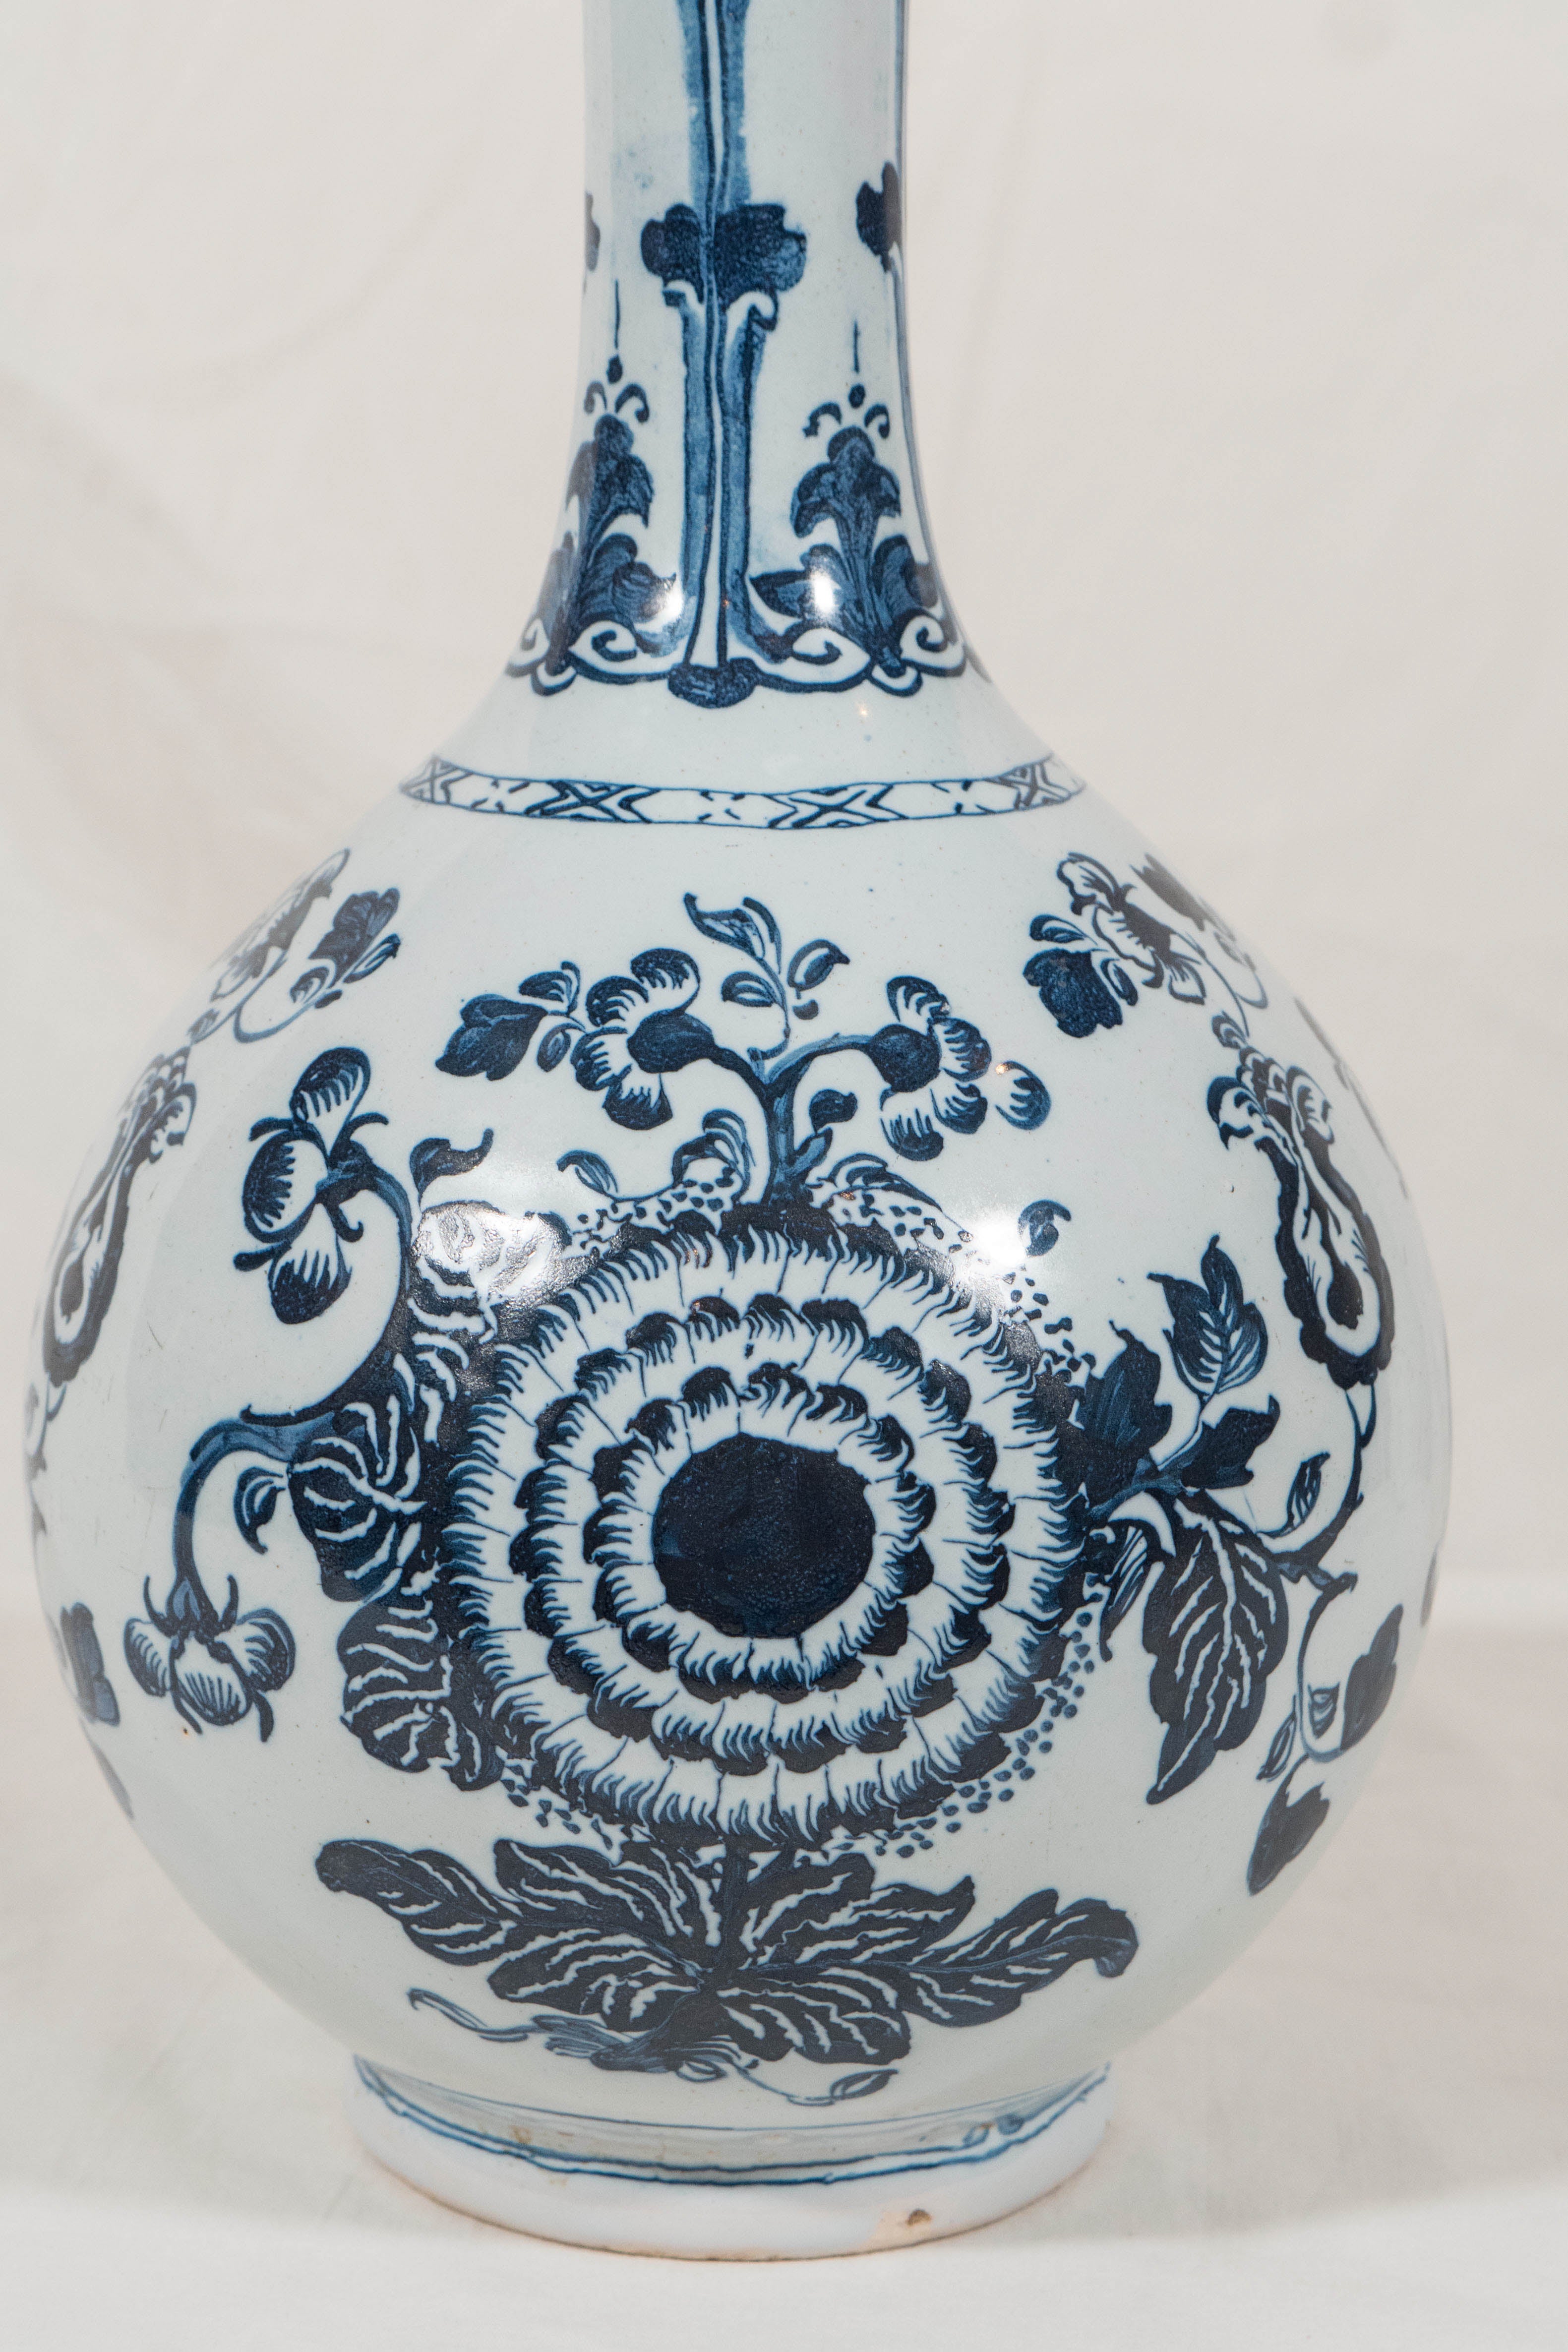 We are pleased to offer this antique English Delft Blue and White bottle vase made in the mid 1700's in London. This delftware vase is painted in deep inky cobalt Blue and White under a pale blue glaze.  It is the deepest cobalt blue we have ever